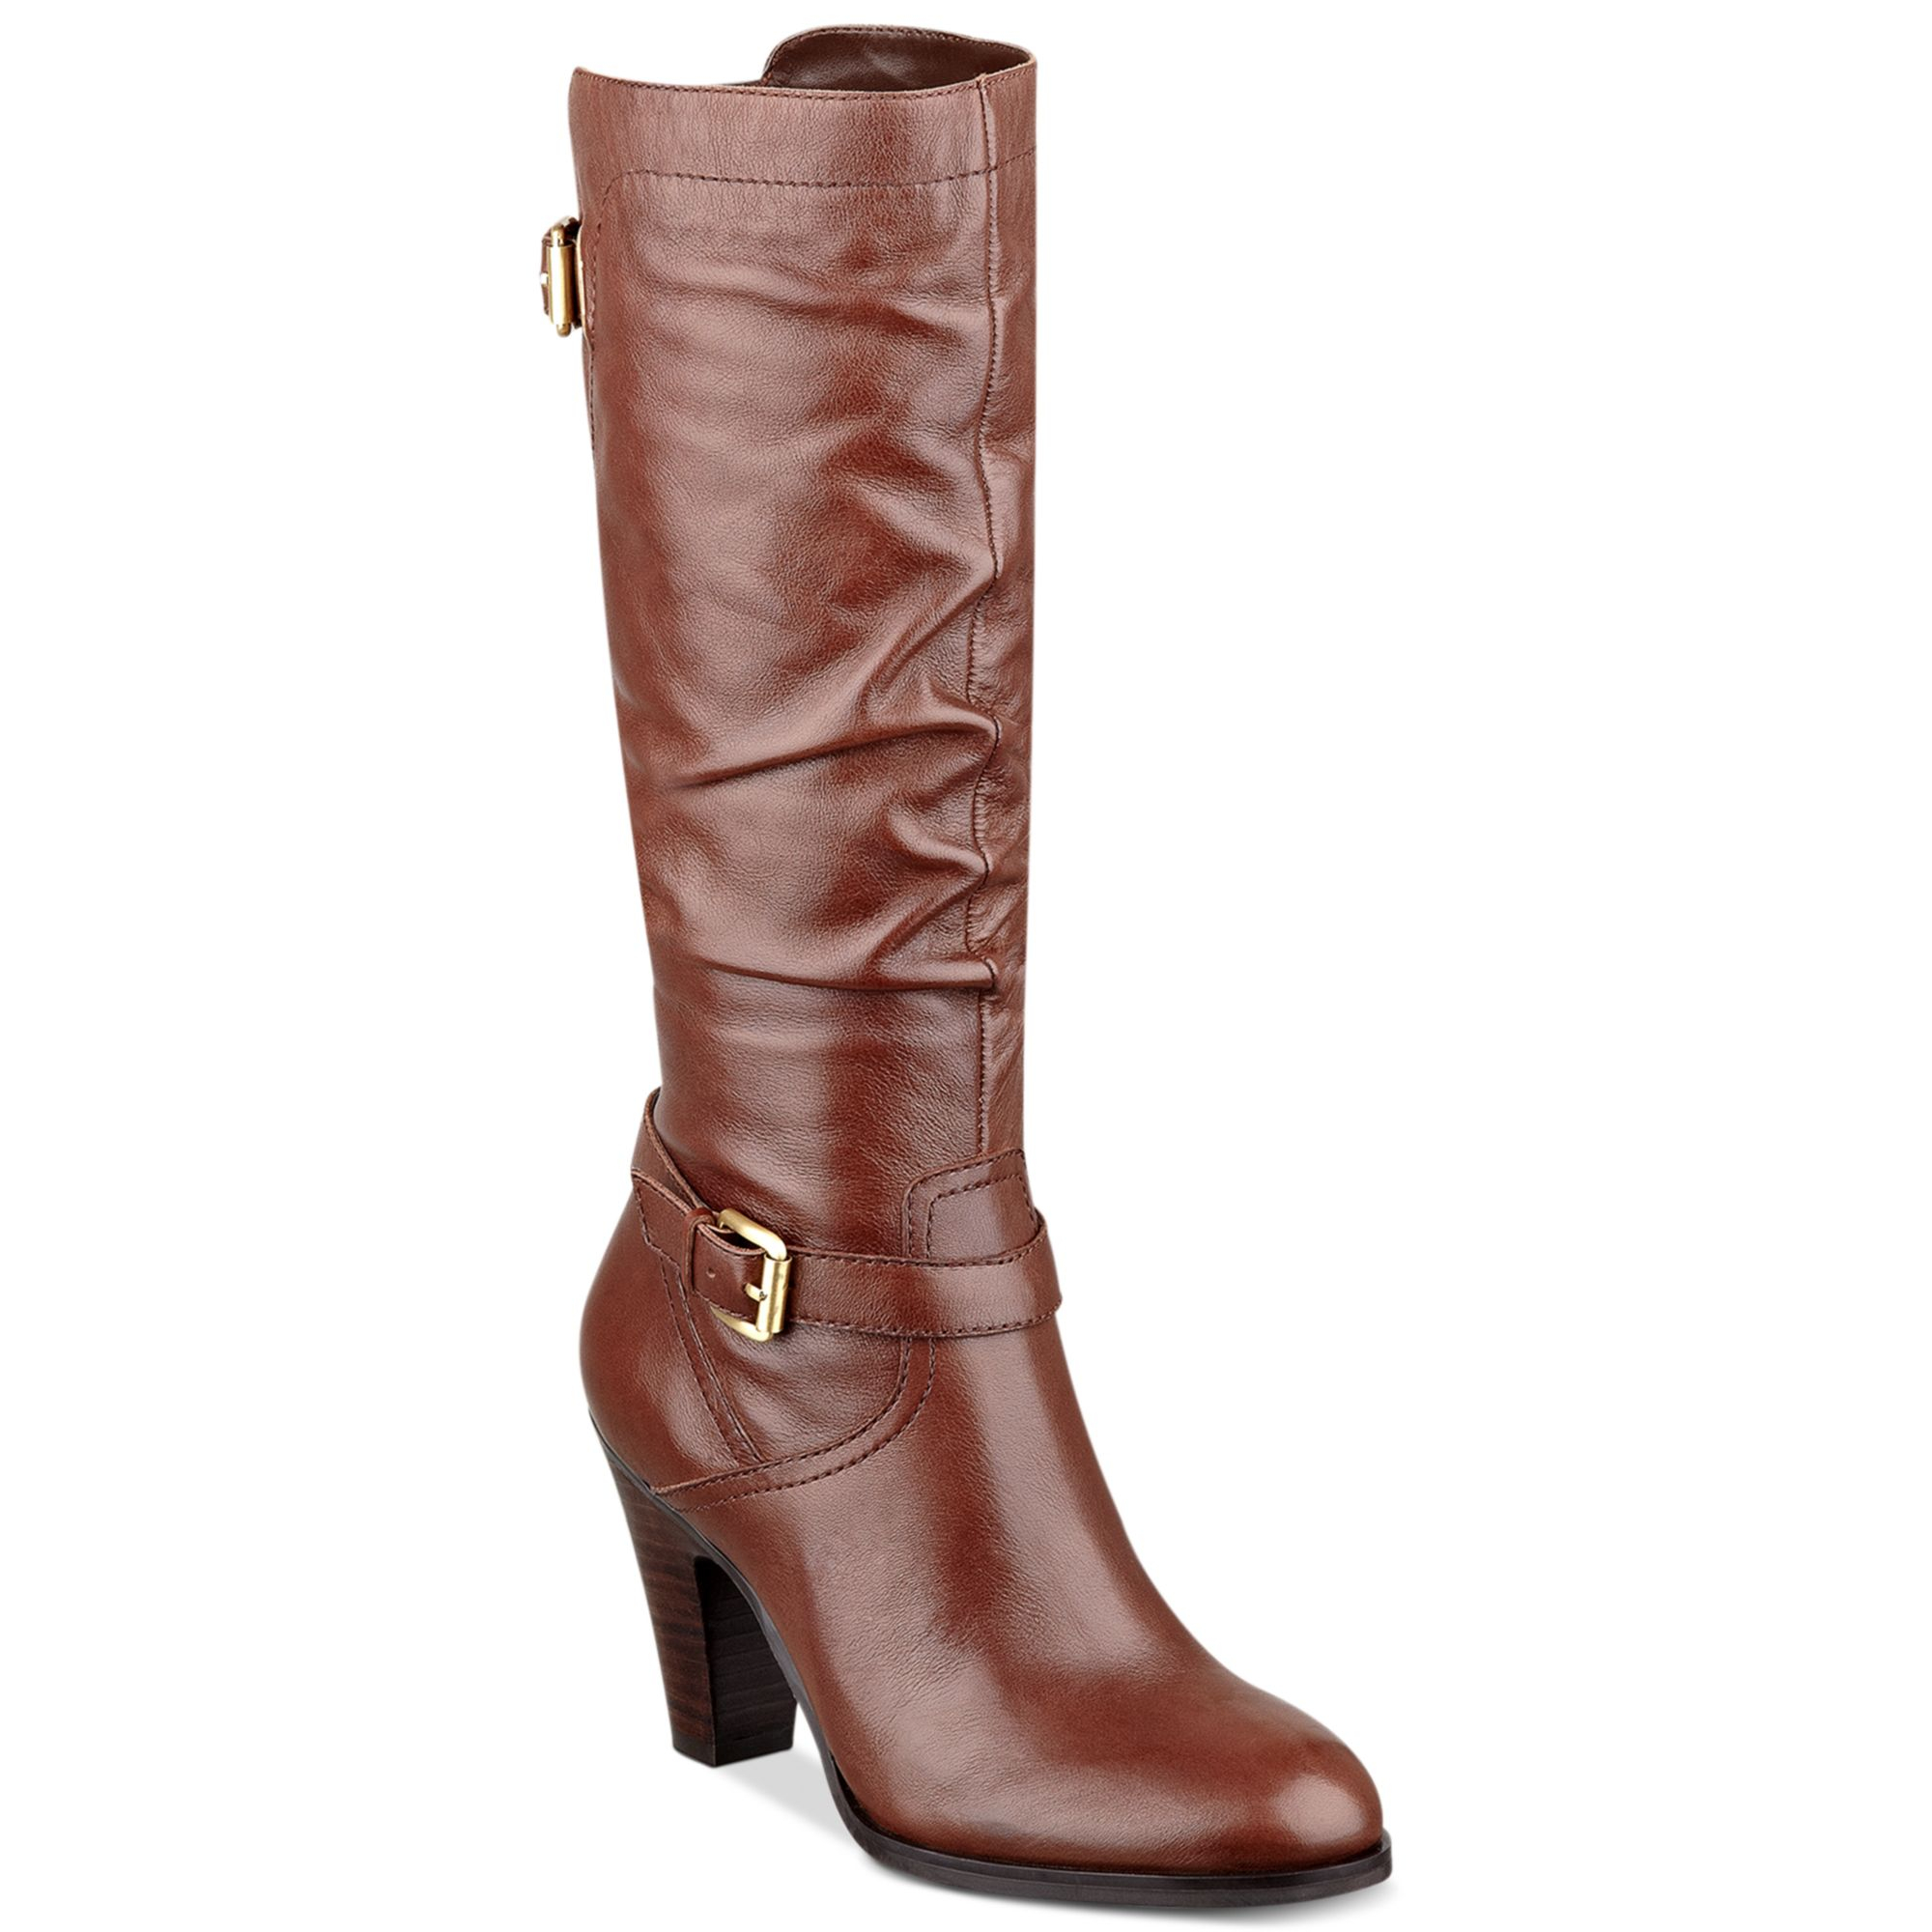 Guess Womens Boots Magy Mid Shaft Boots in Cognac (Brown) - Lyst